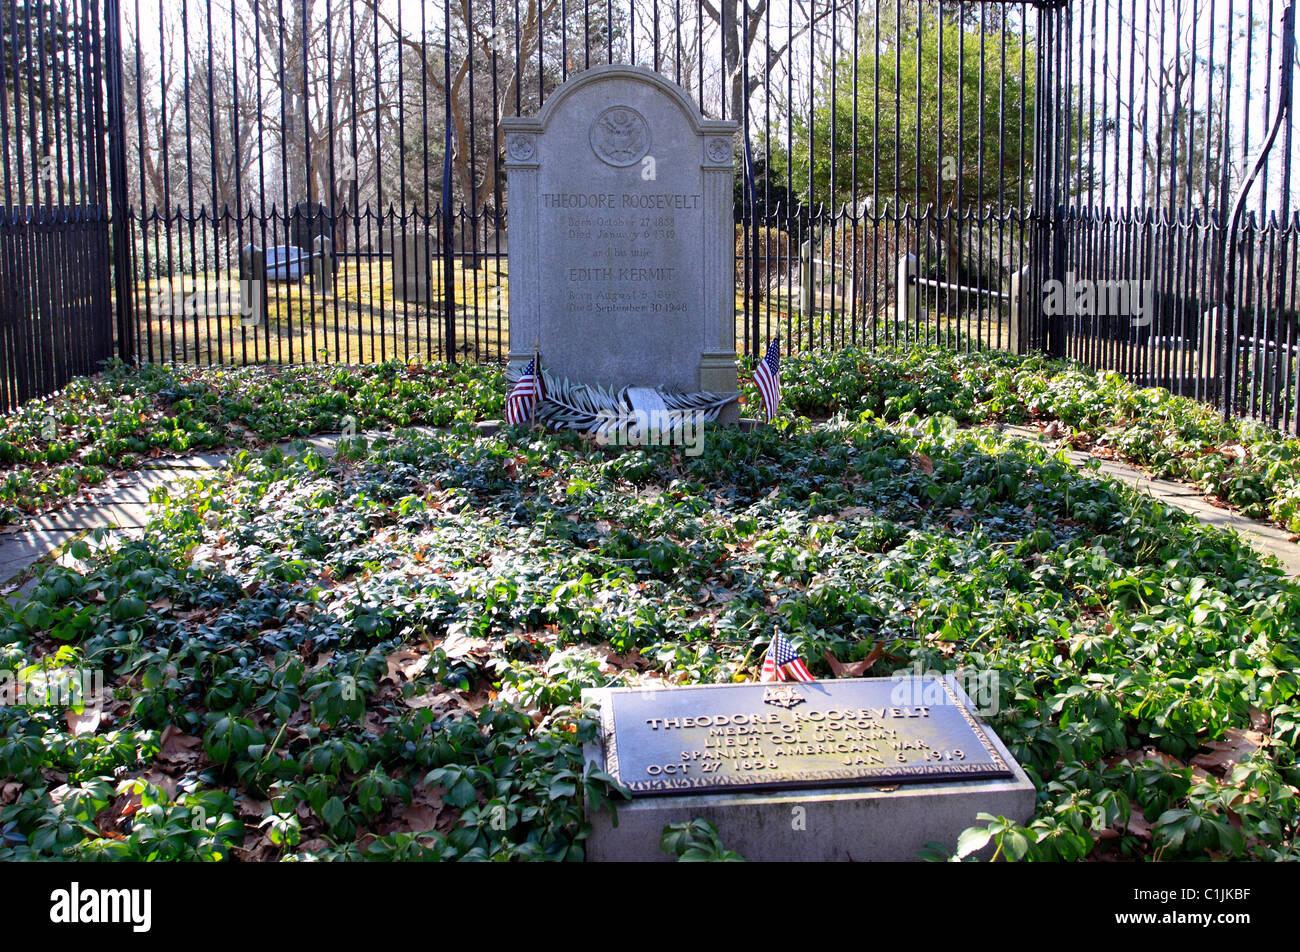 Gravesite of Theodore Roosevelt, 26th President of the United States, Youngs Cemetery, Oyster Bay, Long Island, NY Stock Photo